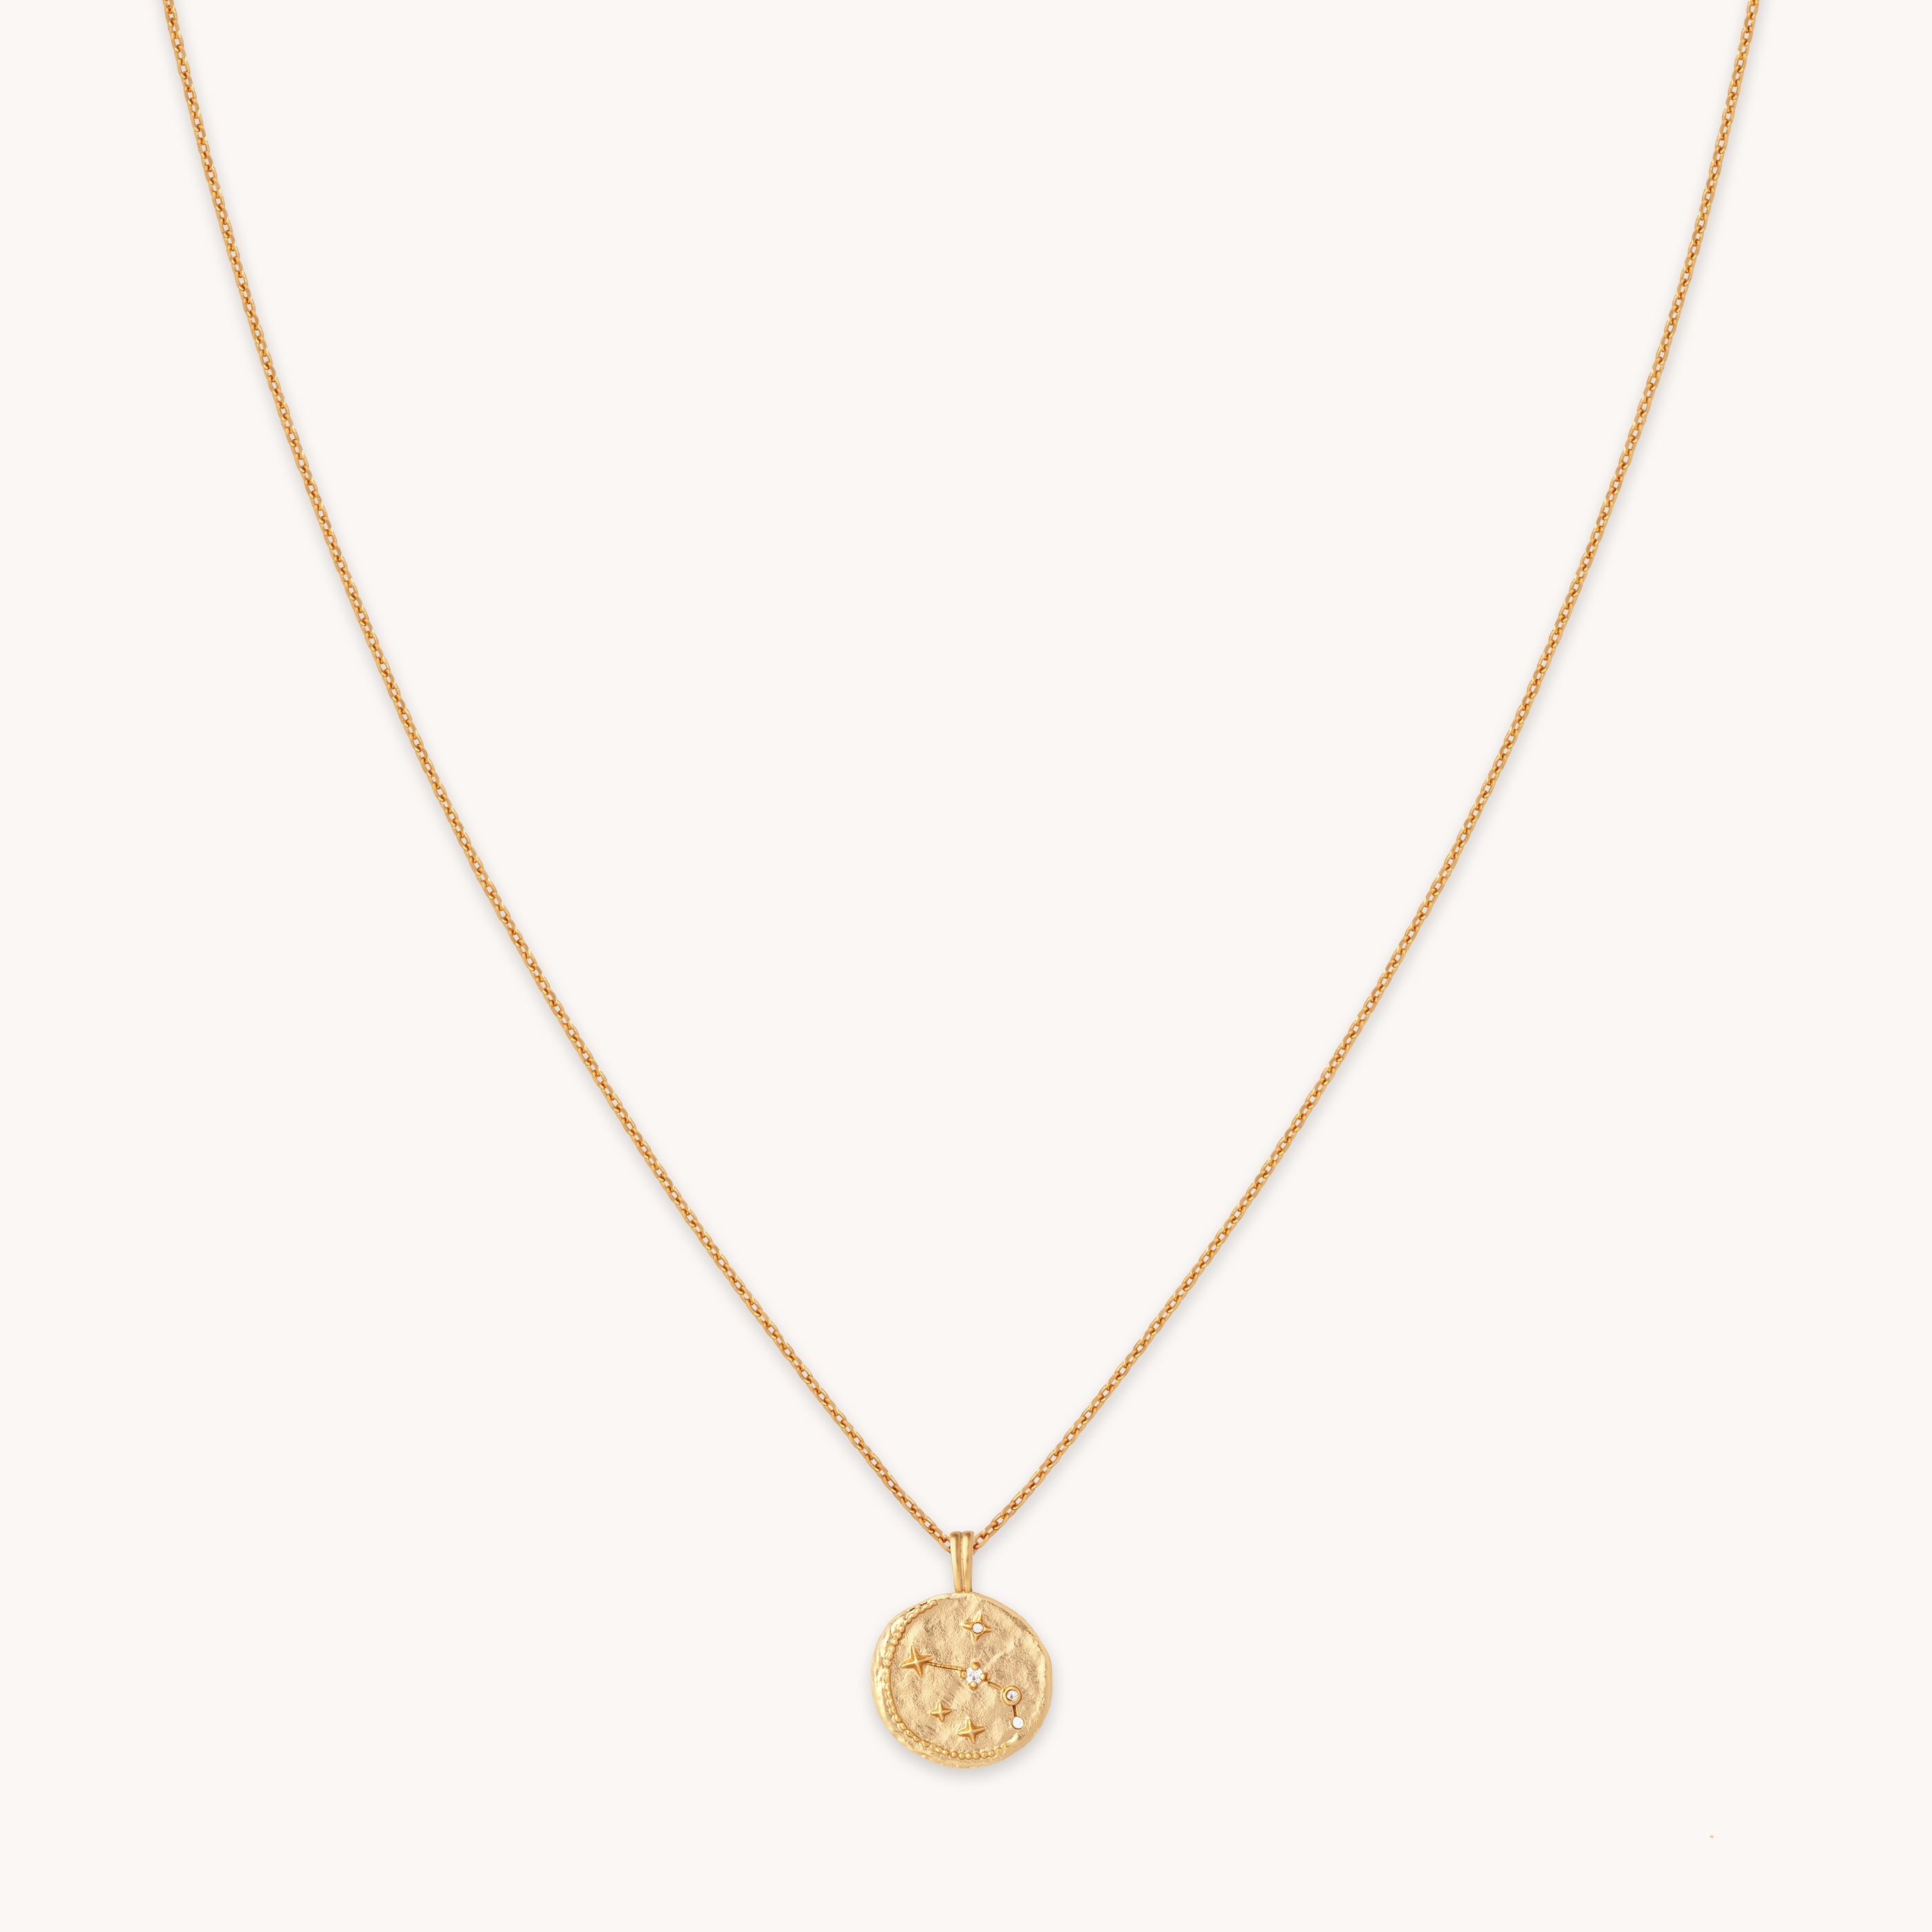 Aries Zodiac Pendant Necklace in Gold